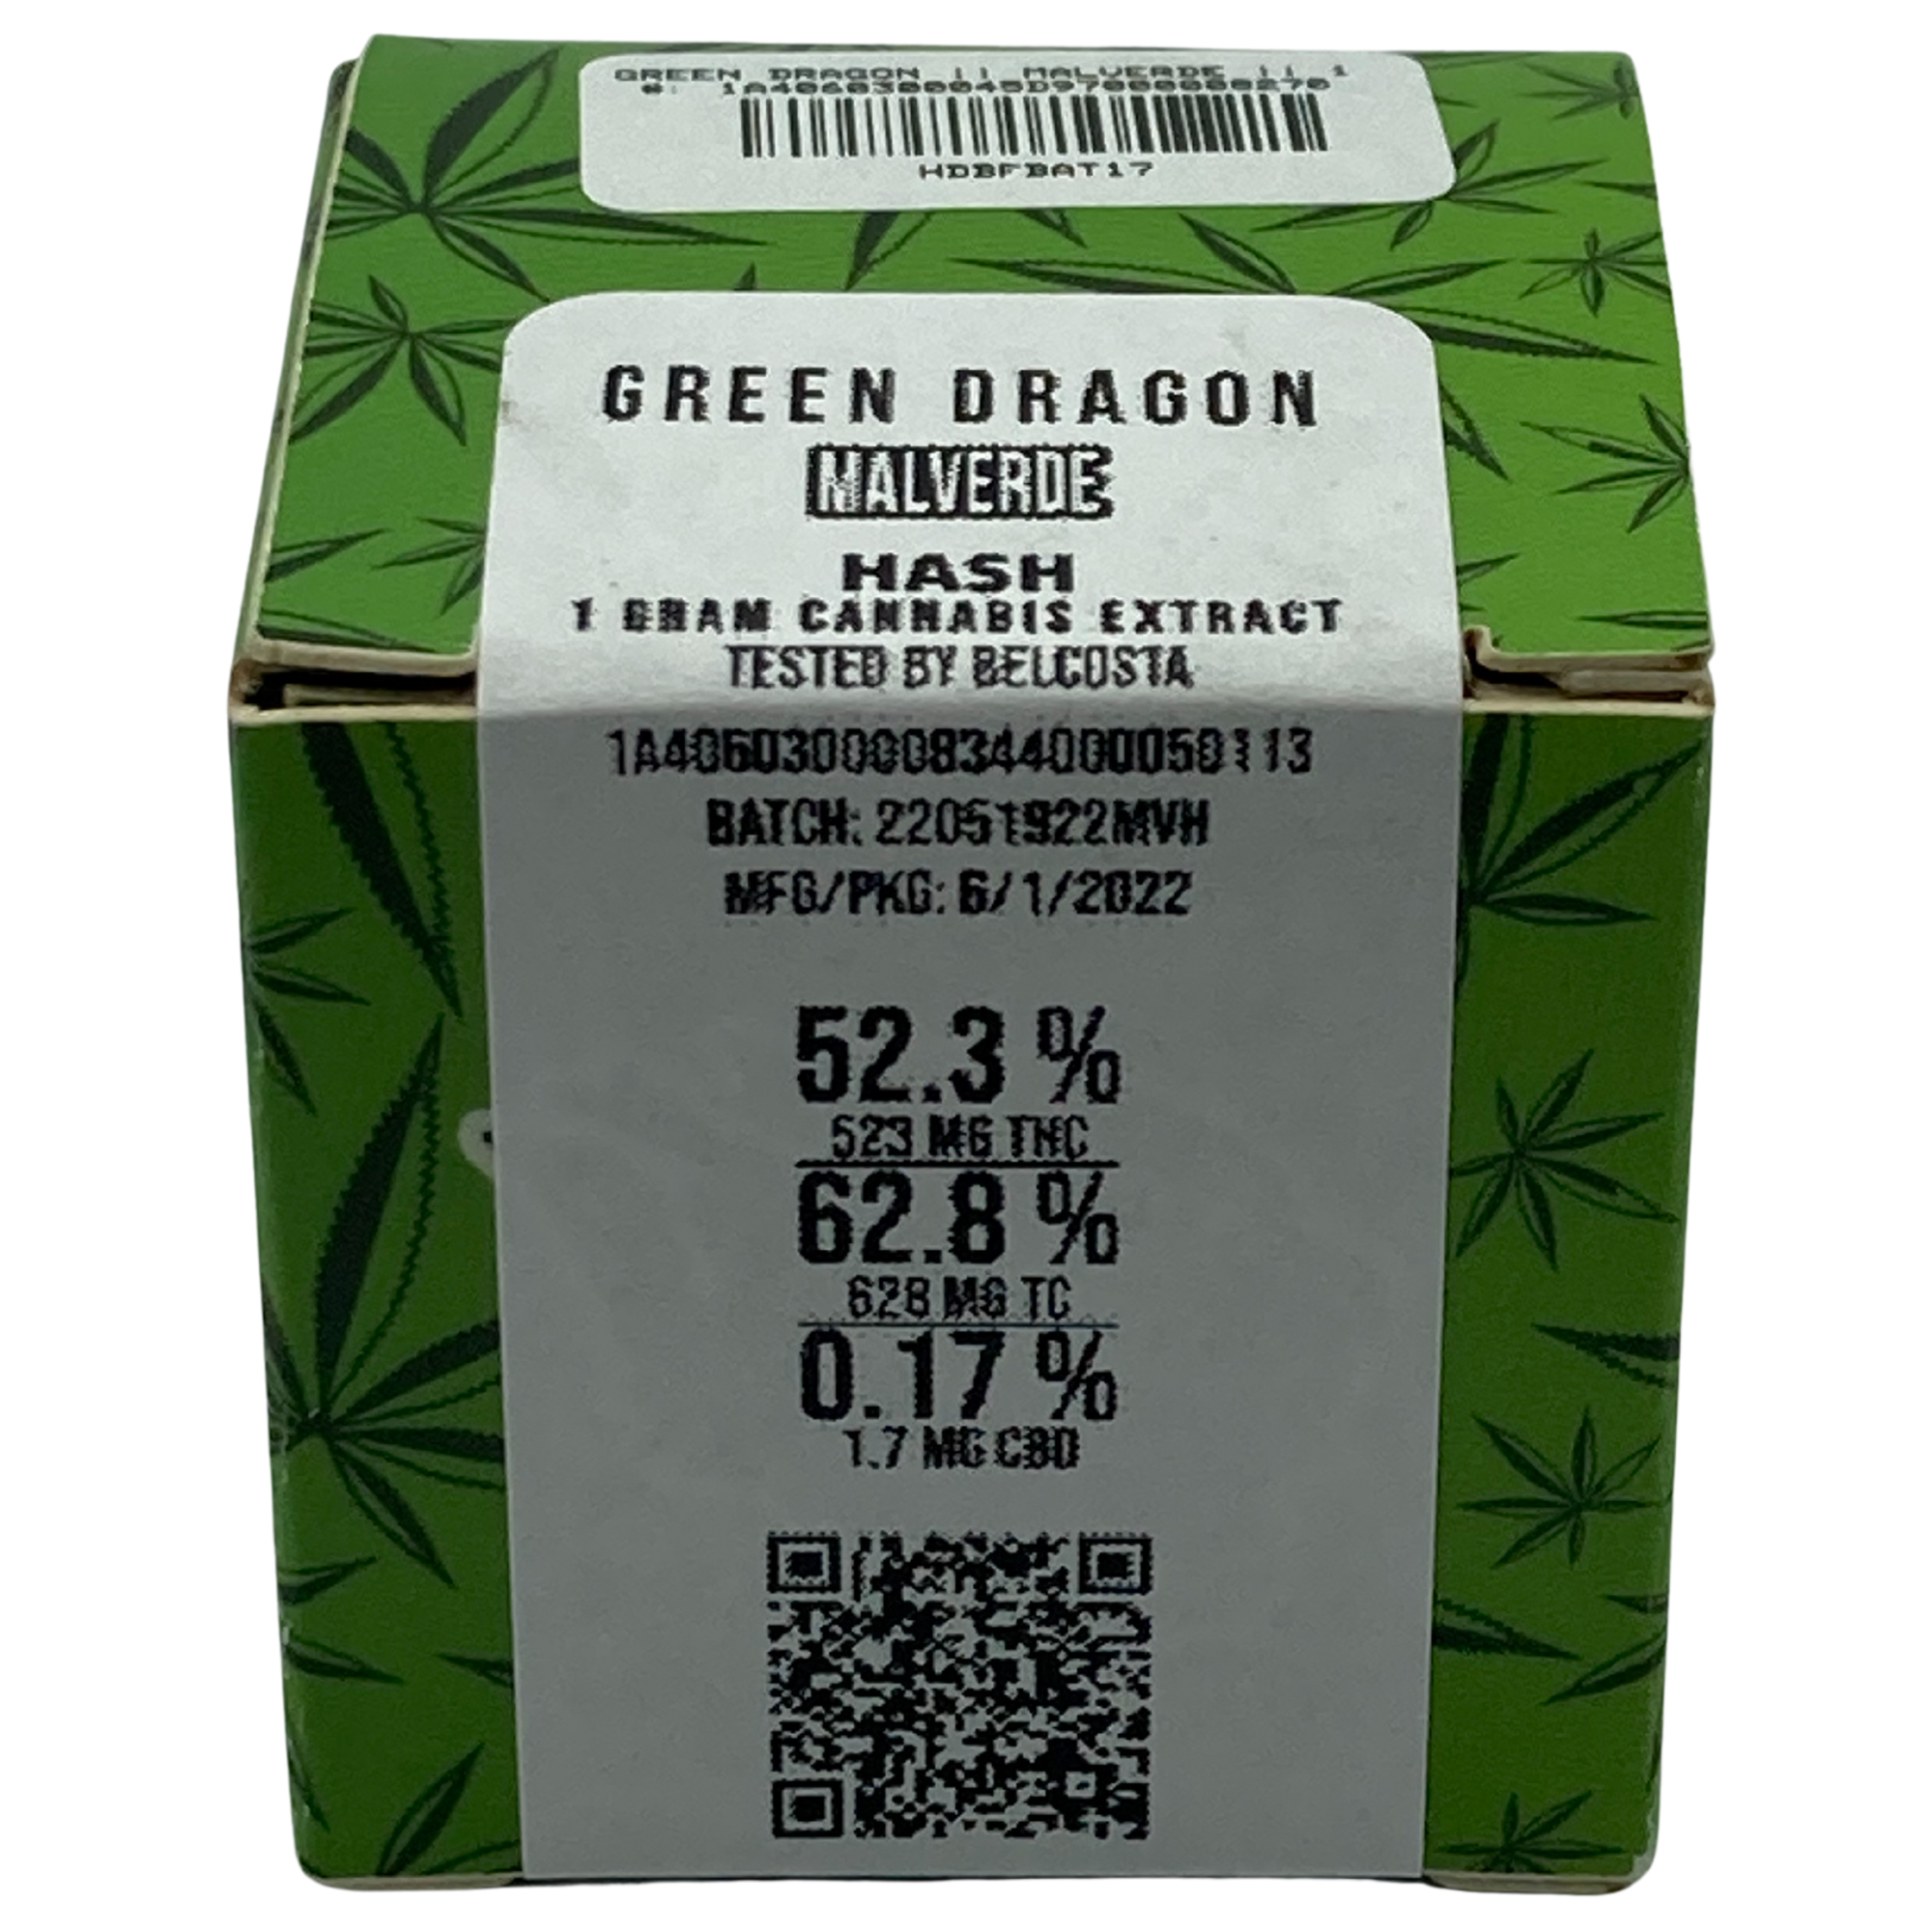 All About Weed Measurements: A Complete Guide - The Green Dragon CBD